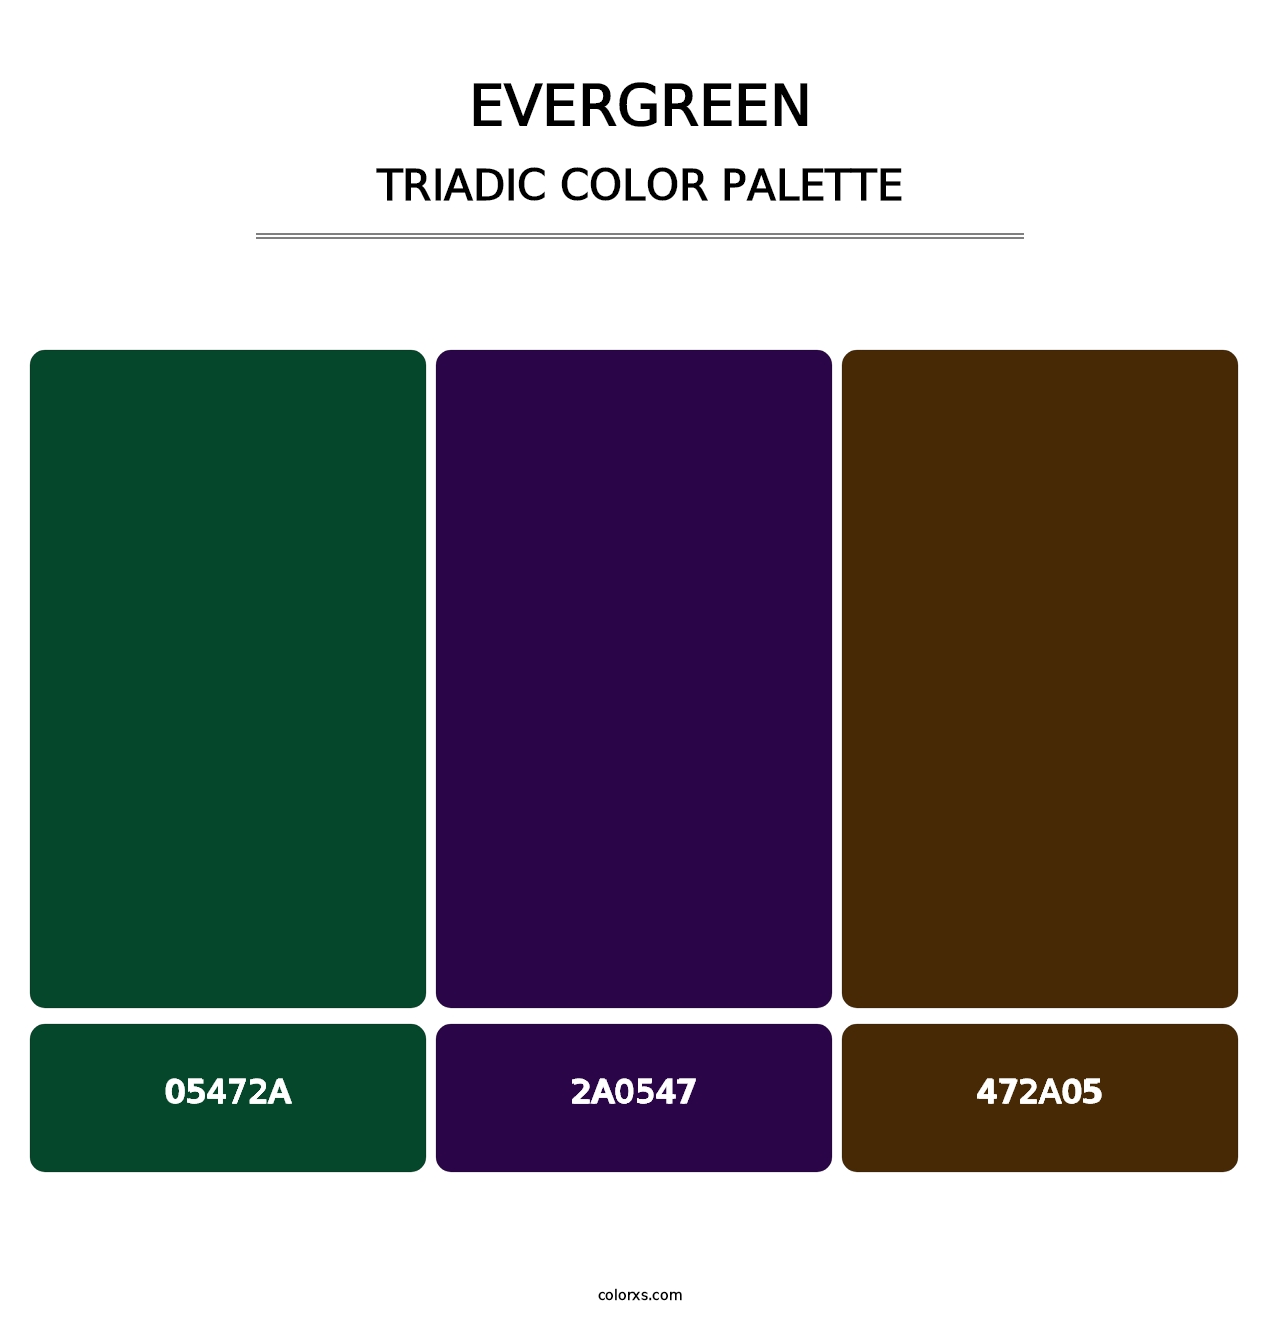 Evergreen - Triadic Color Palette